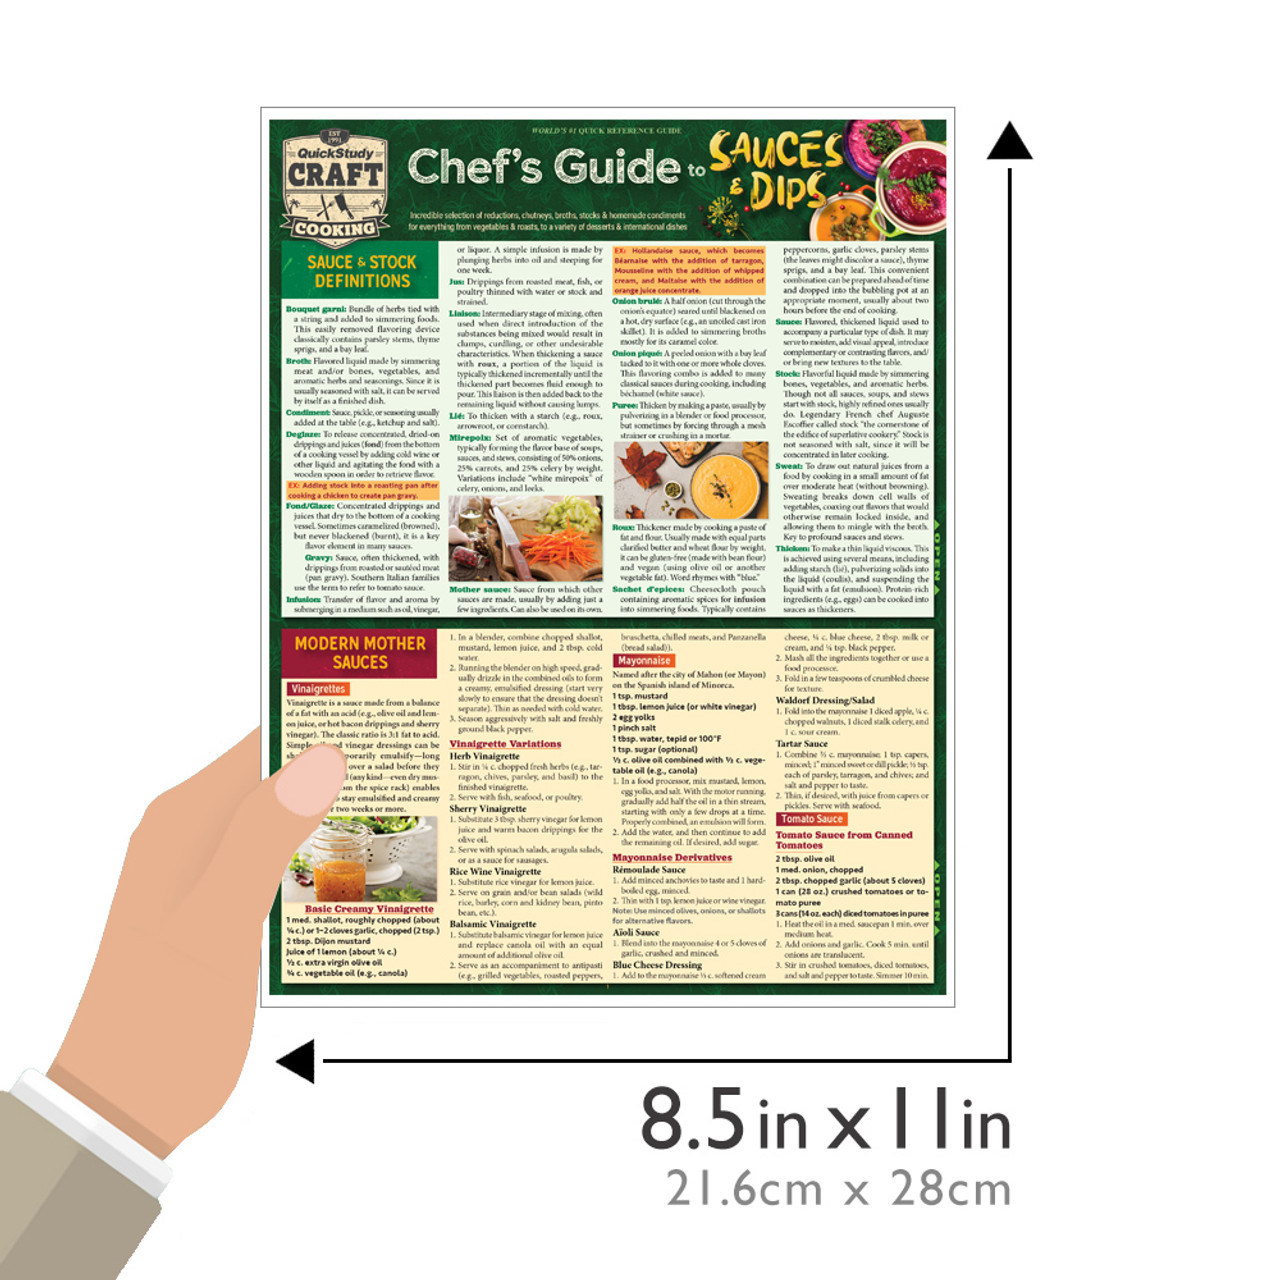 Sauces, dressing and spreads reviews, tests, information and buying guides